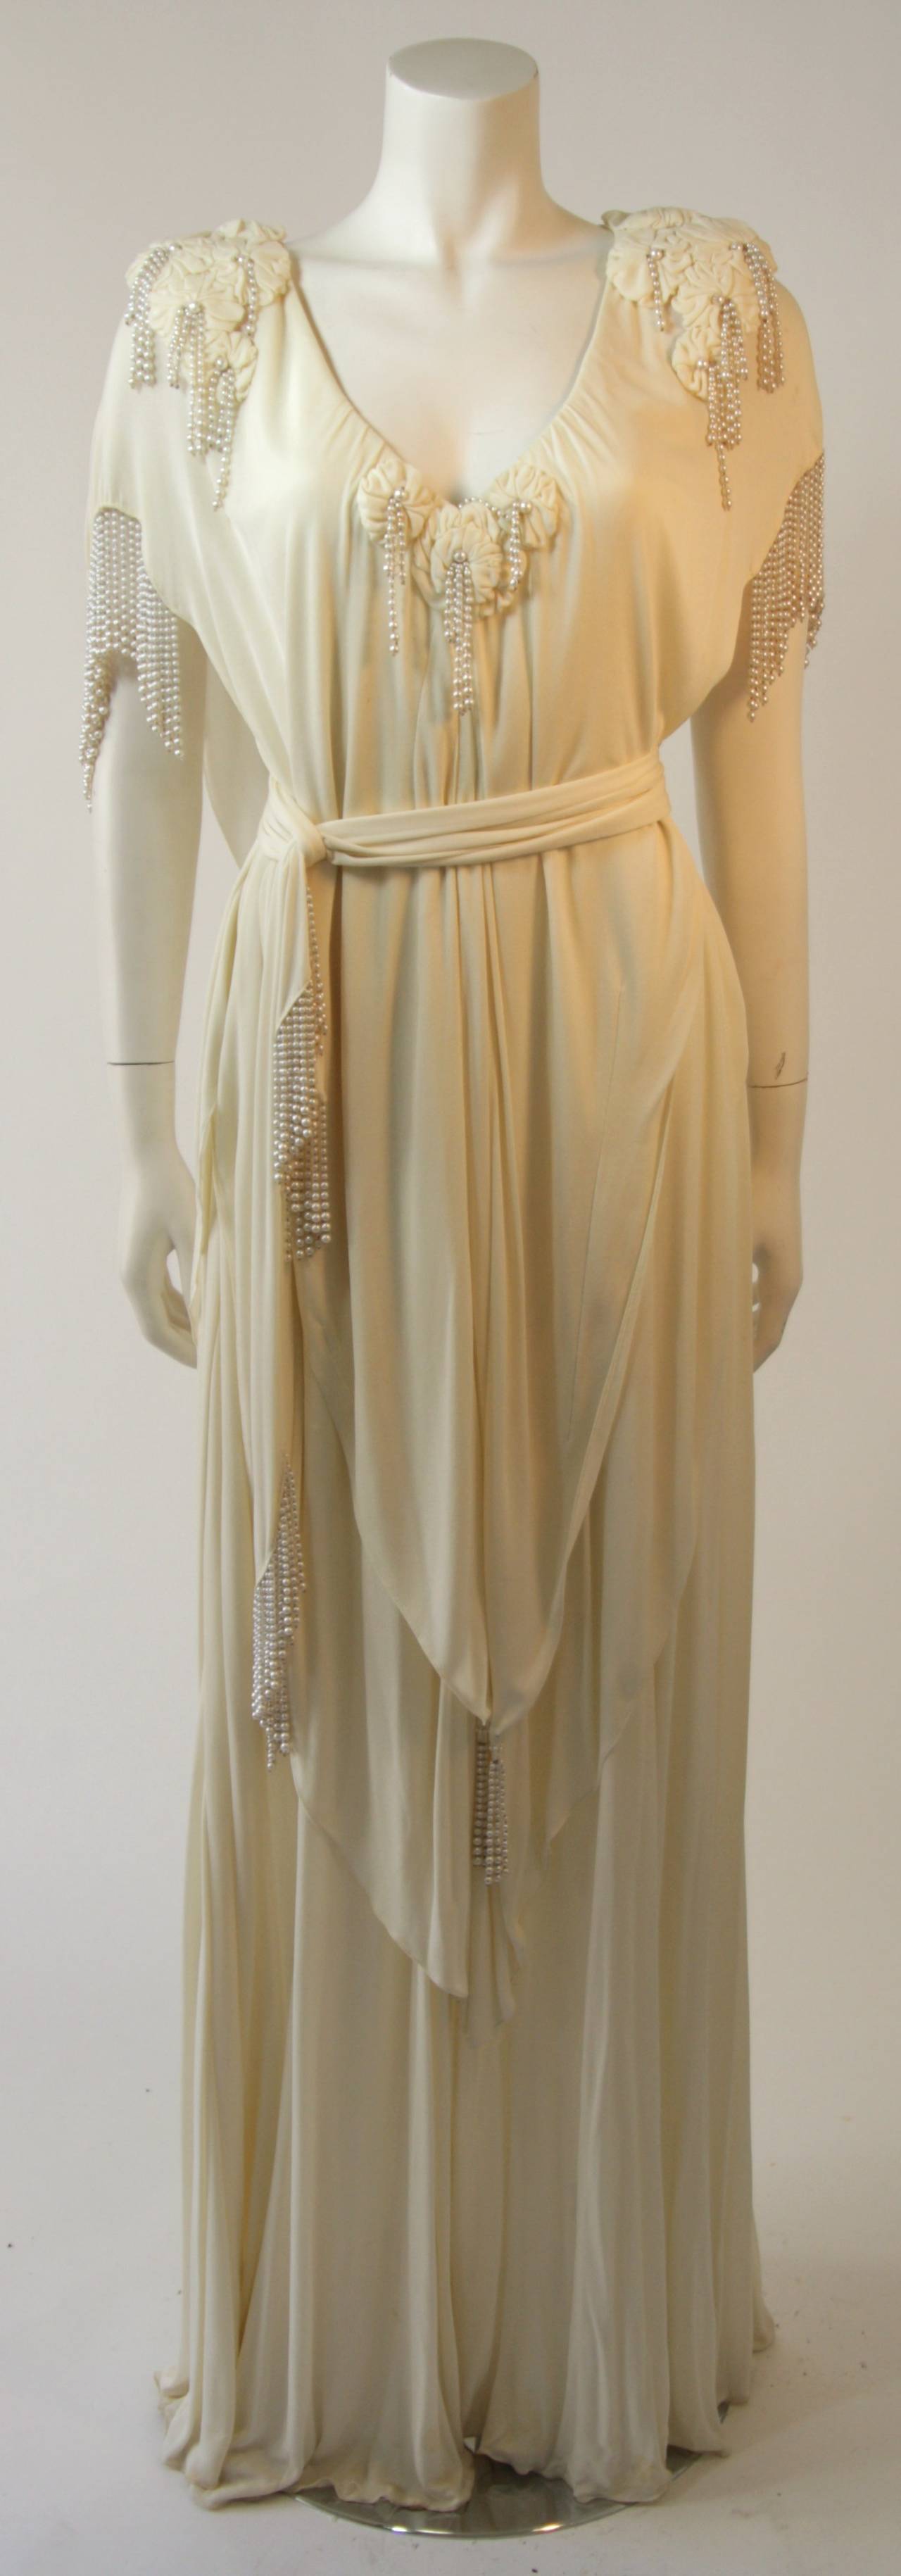 This stunning Holly's Harp design is available for viewing at our Beverly Hills Boutique. This gown is composed of an off white jersey and is accented with pearls. The kaftan style design comes with a belt for a contouring of the waist. A stunning